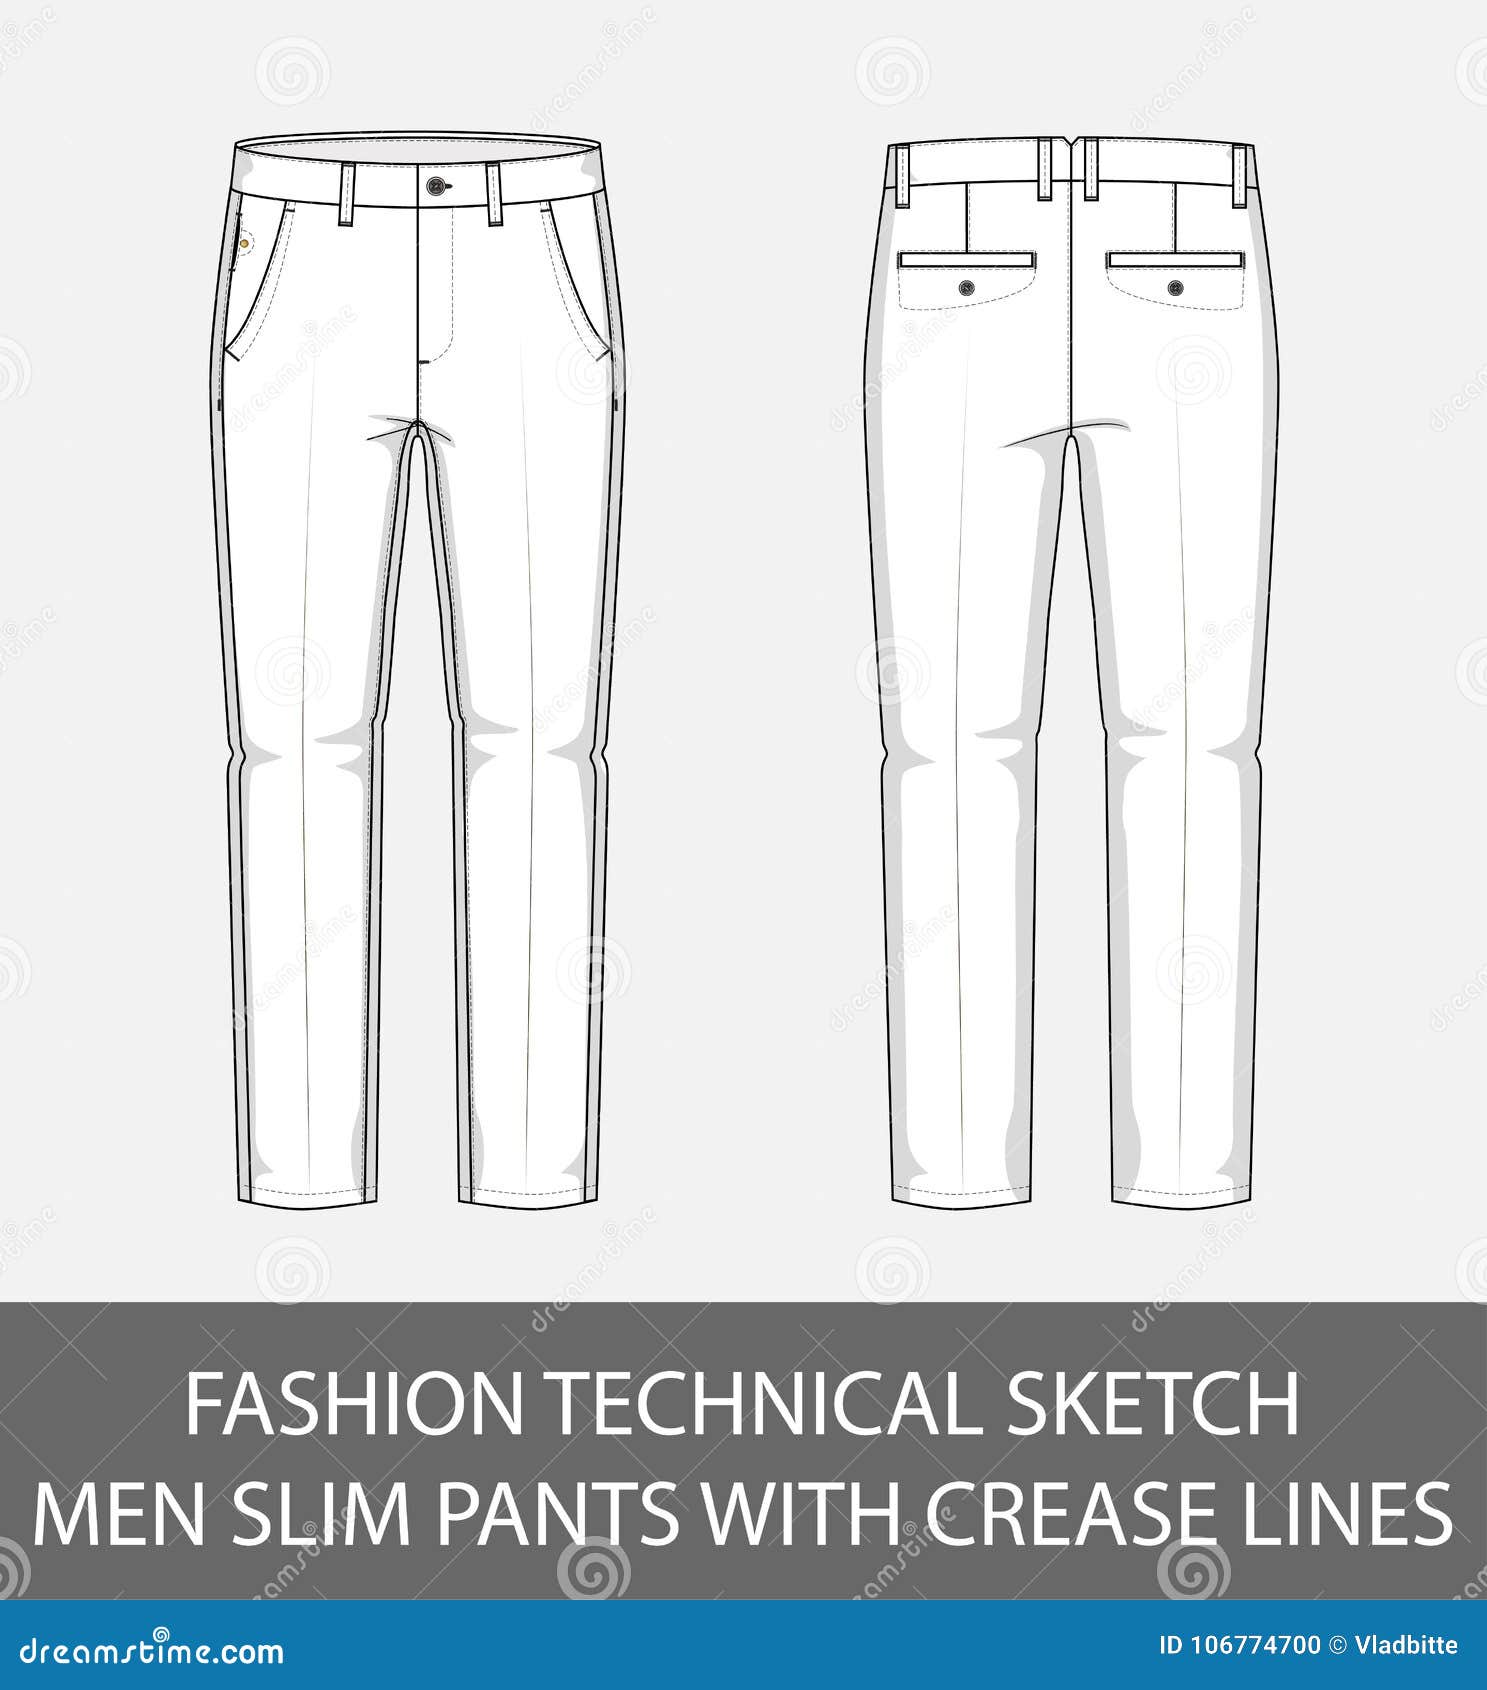 fashion technical sketch men slim fit pants with crease lines